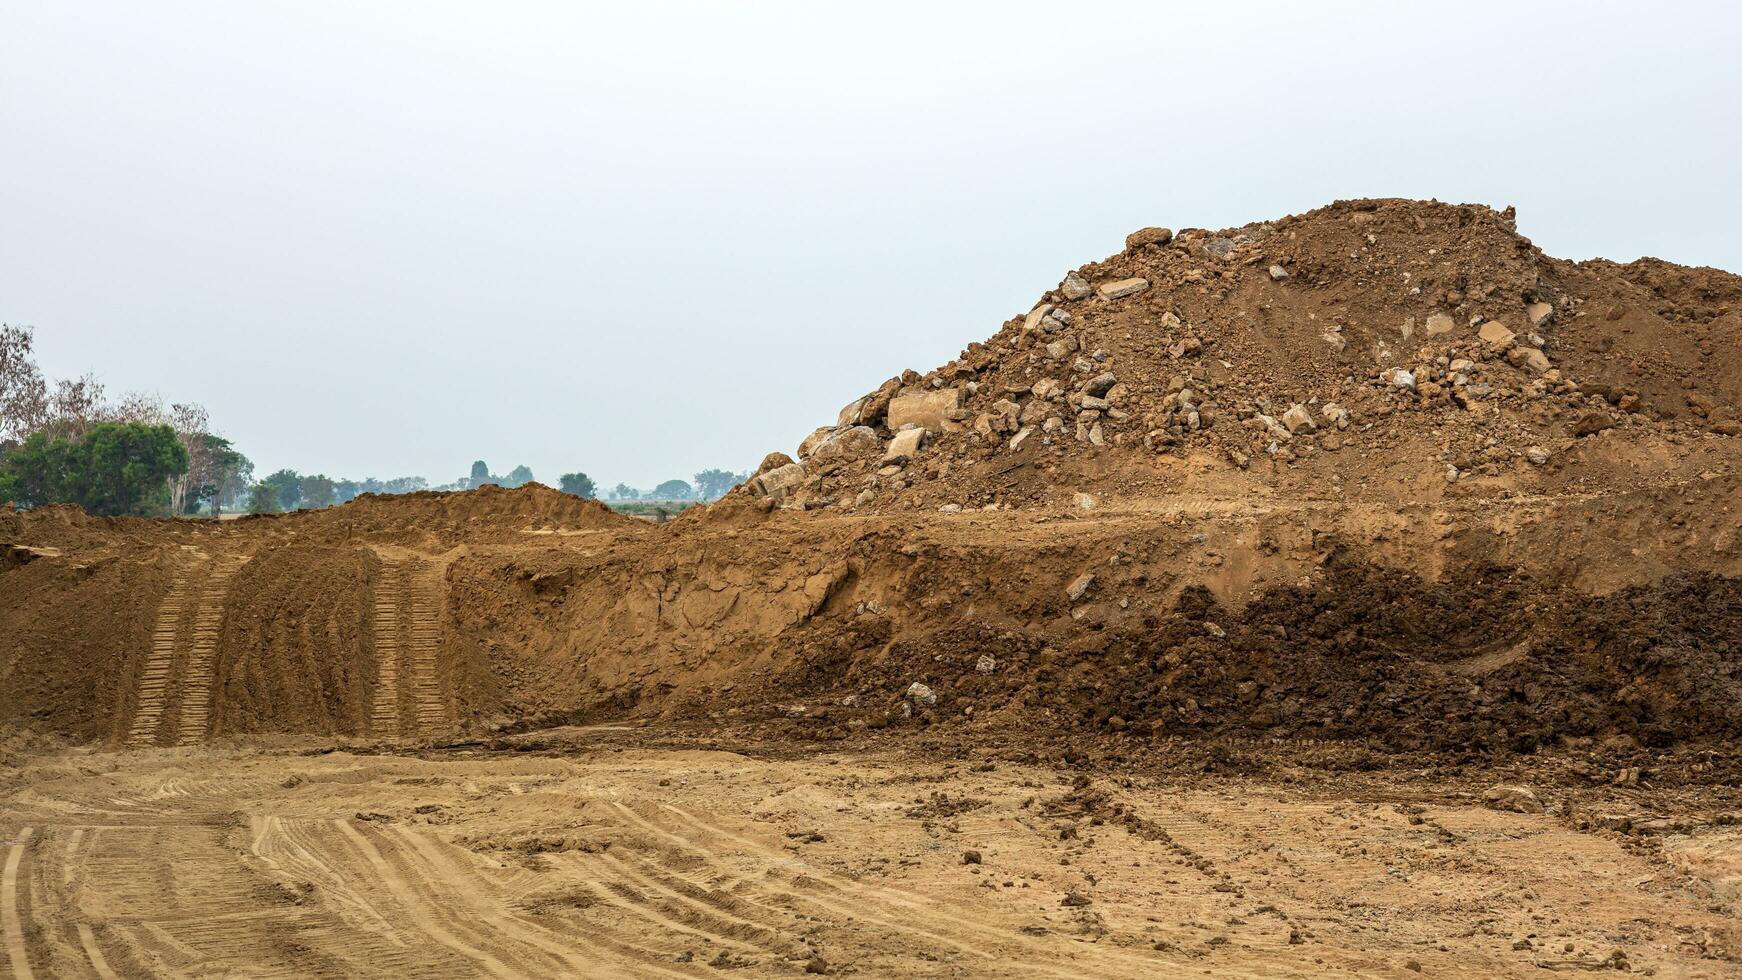 Scenery of a large mound of sand that was excavated and poured together leaving traces. photo